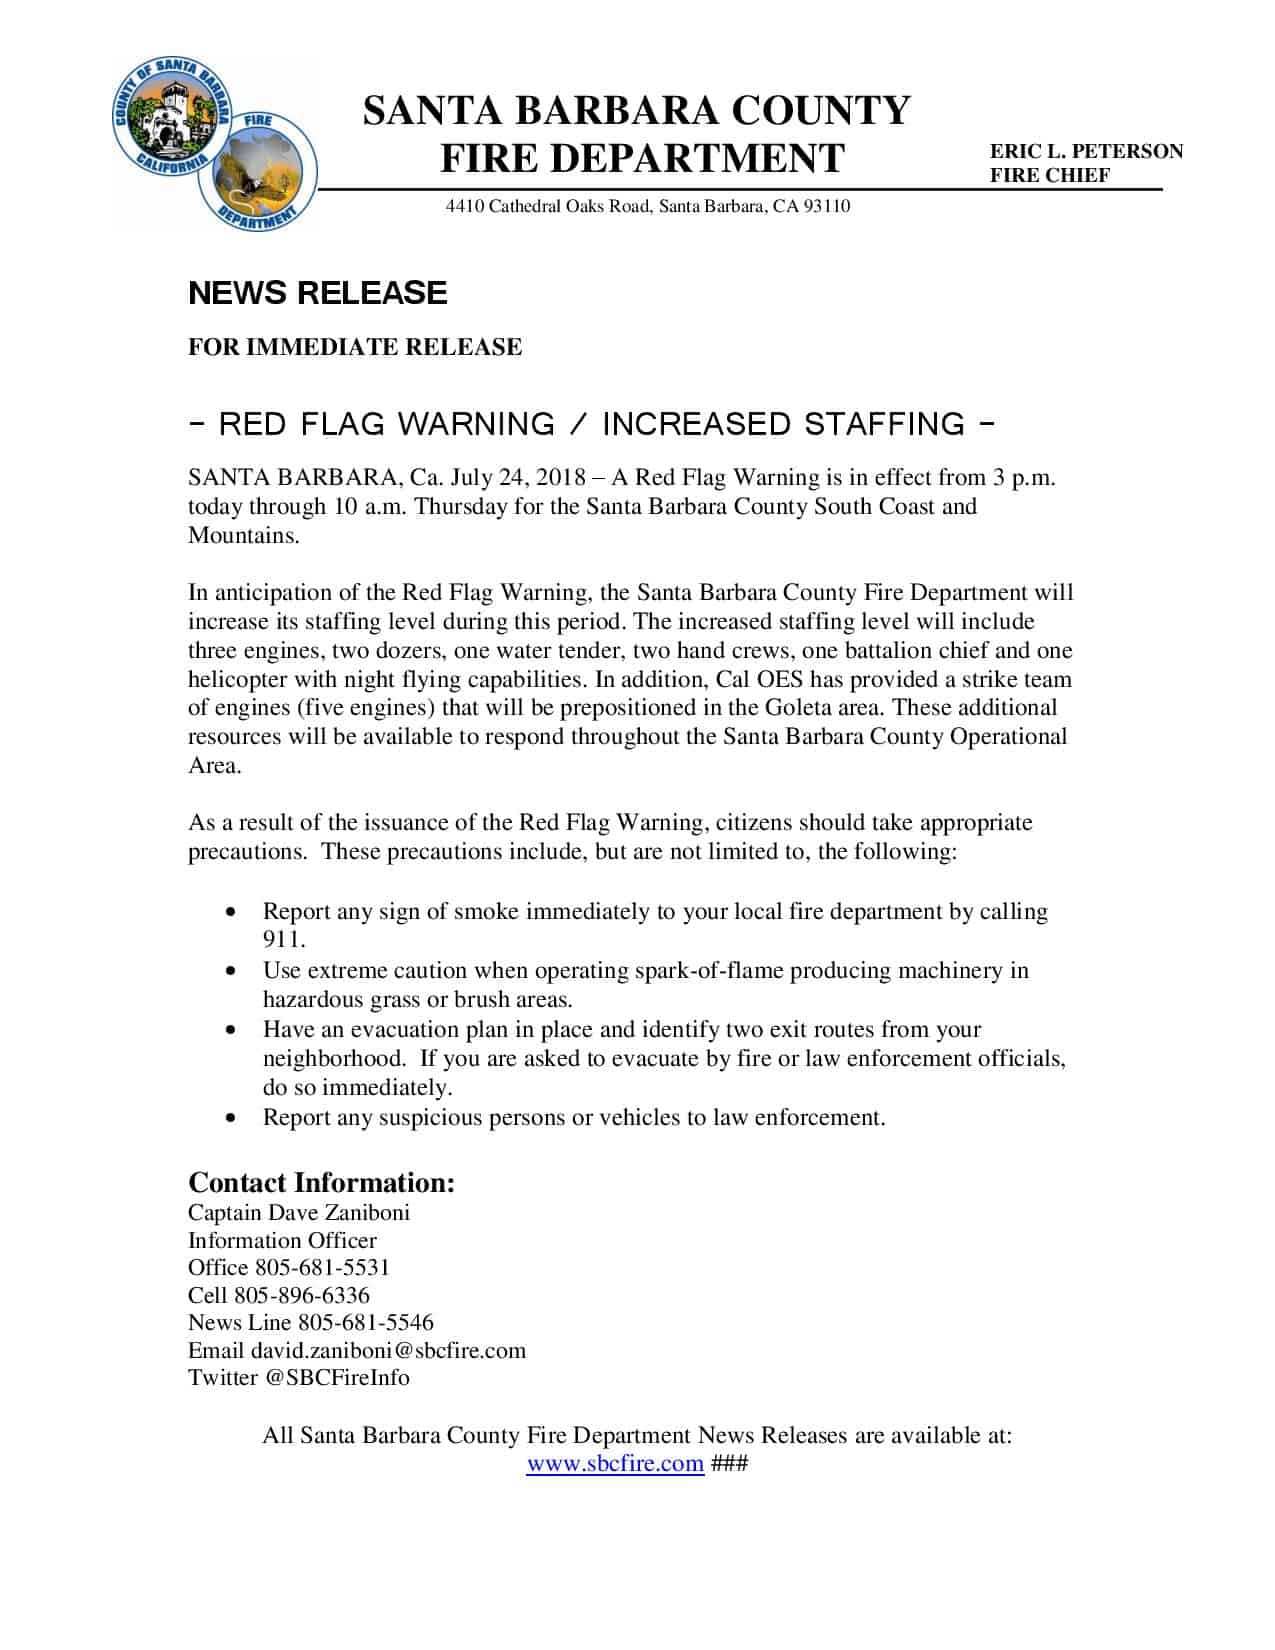 Red Flag Warning/Increased Staffing